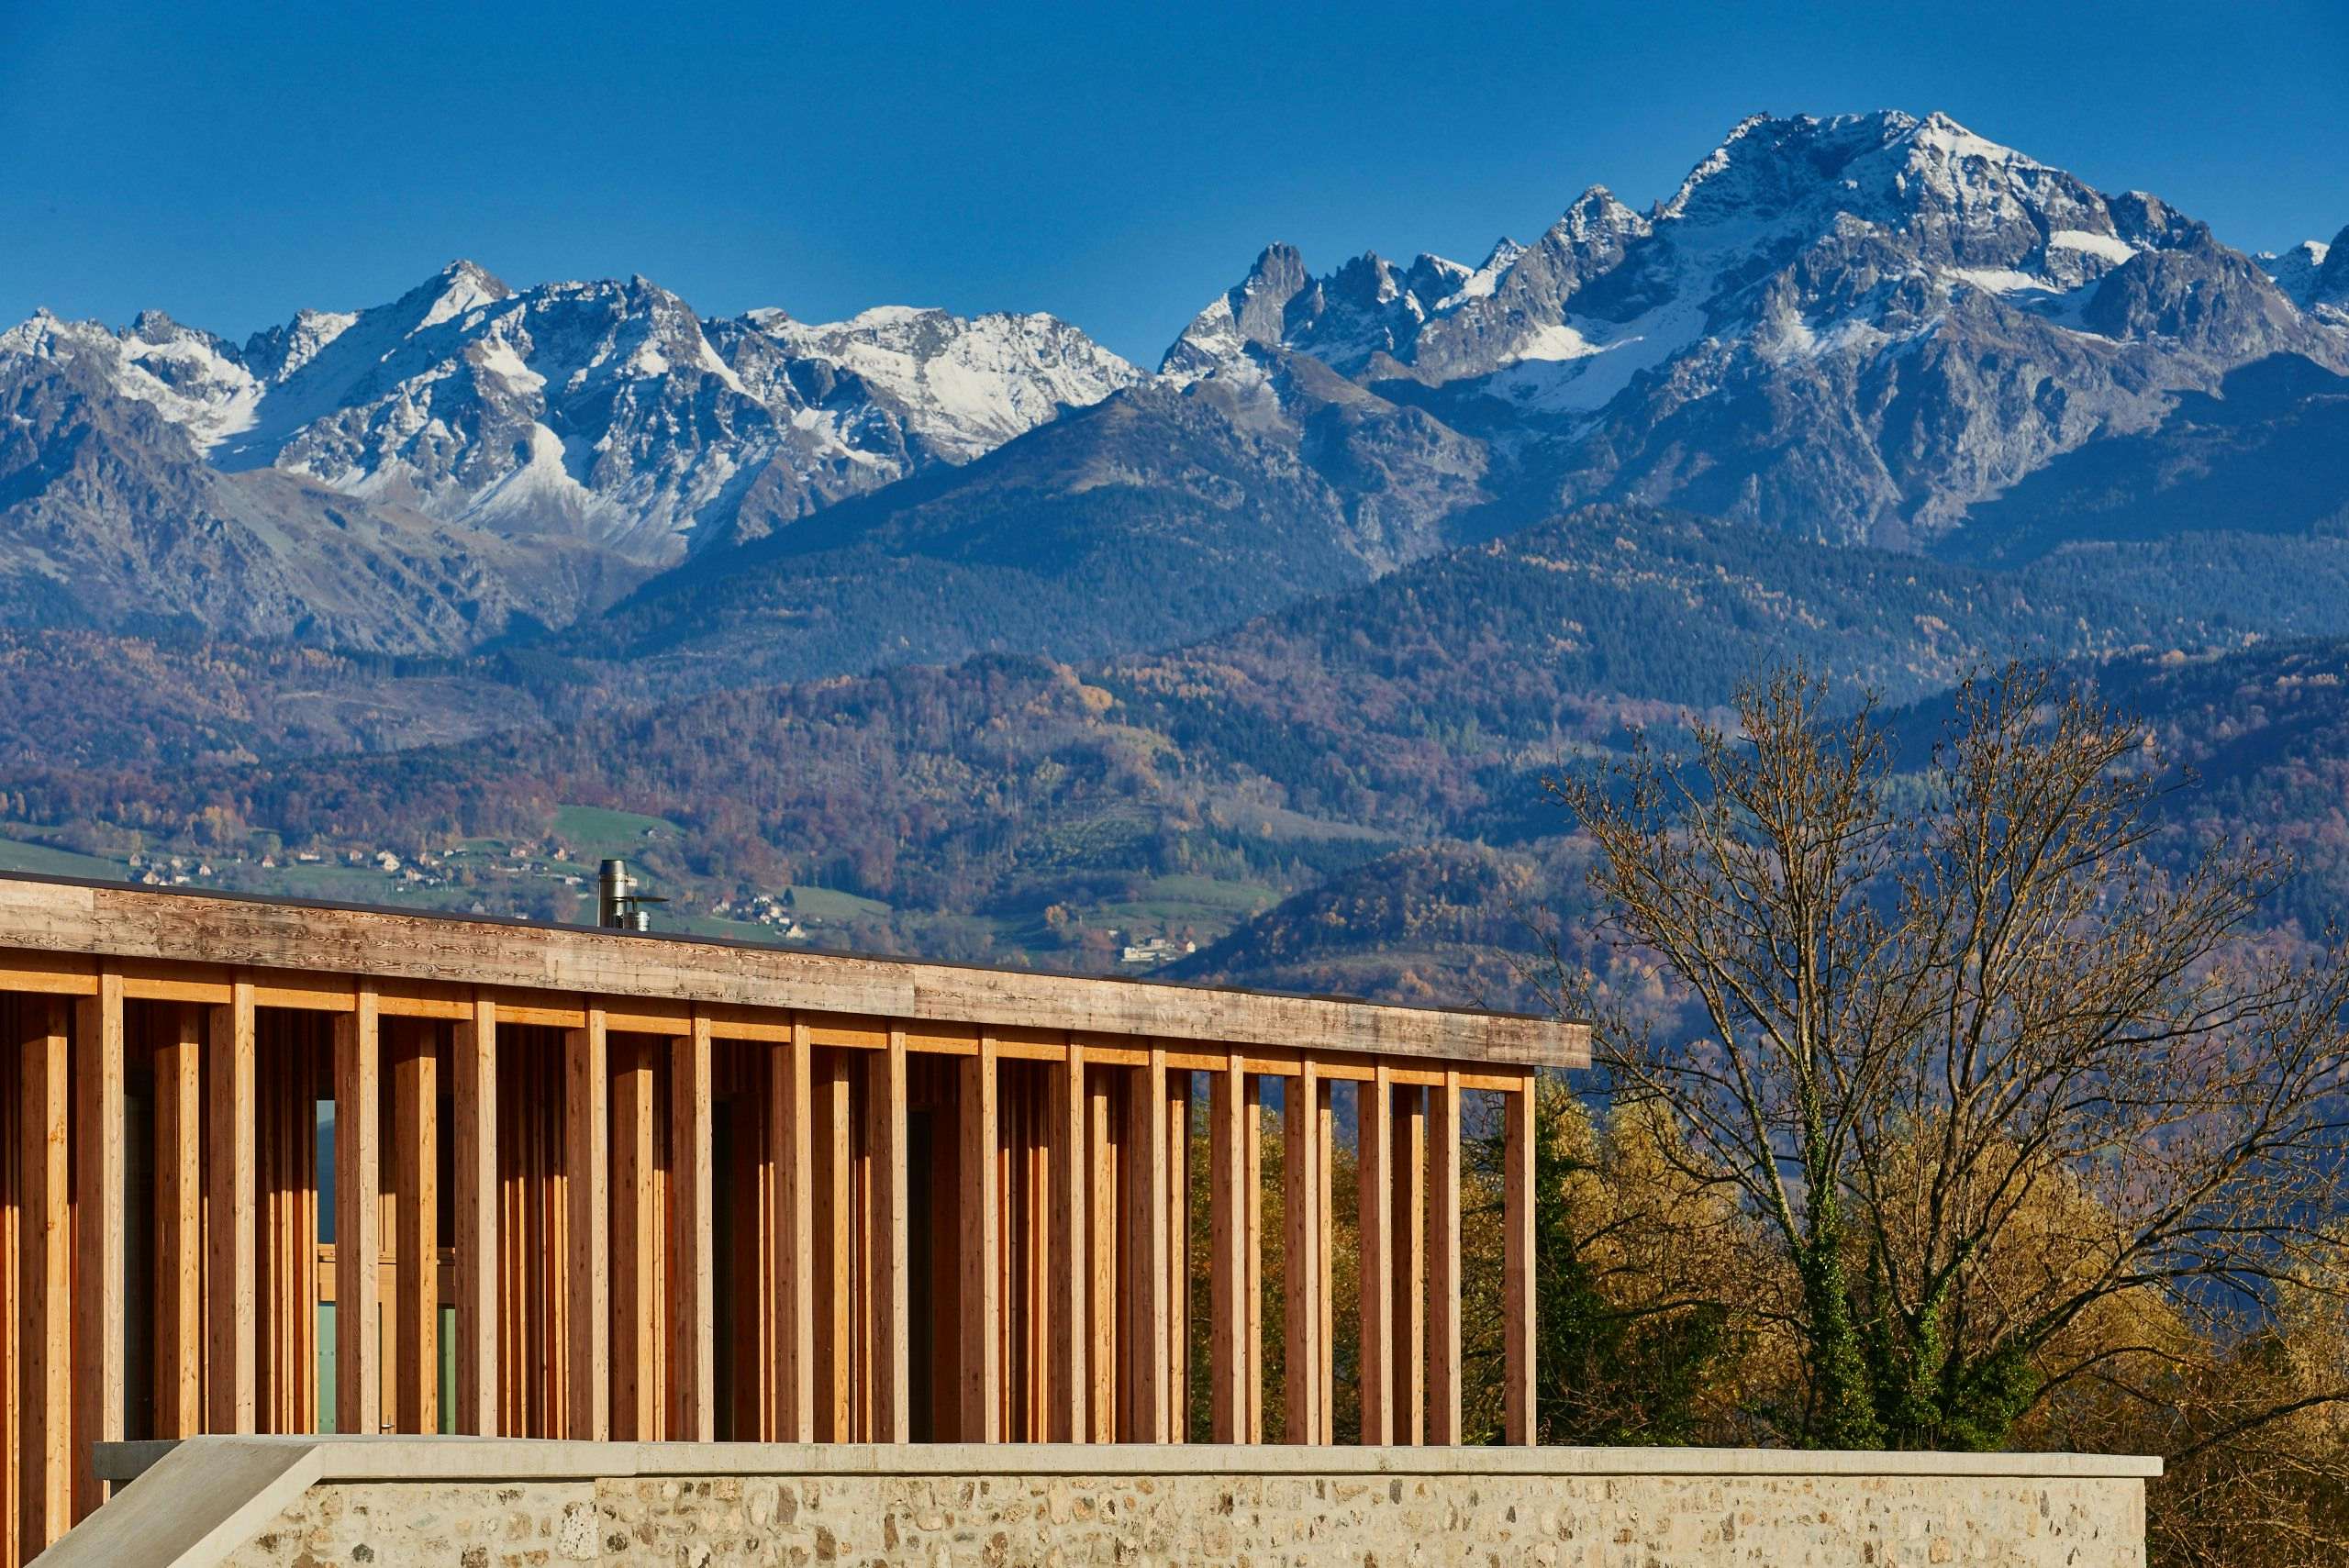 The Belledonne mountain range overlooking the Maison des Arts building in Montbonnot-Saint-Martin, France. Photography by Xavier Wendling.